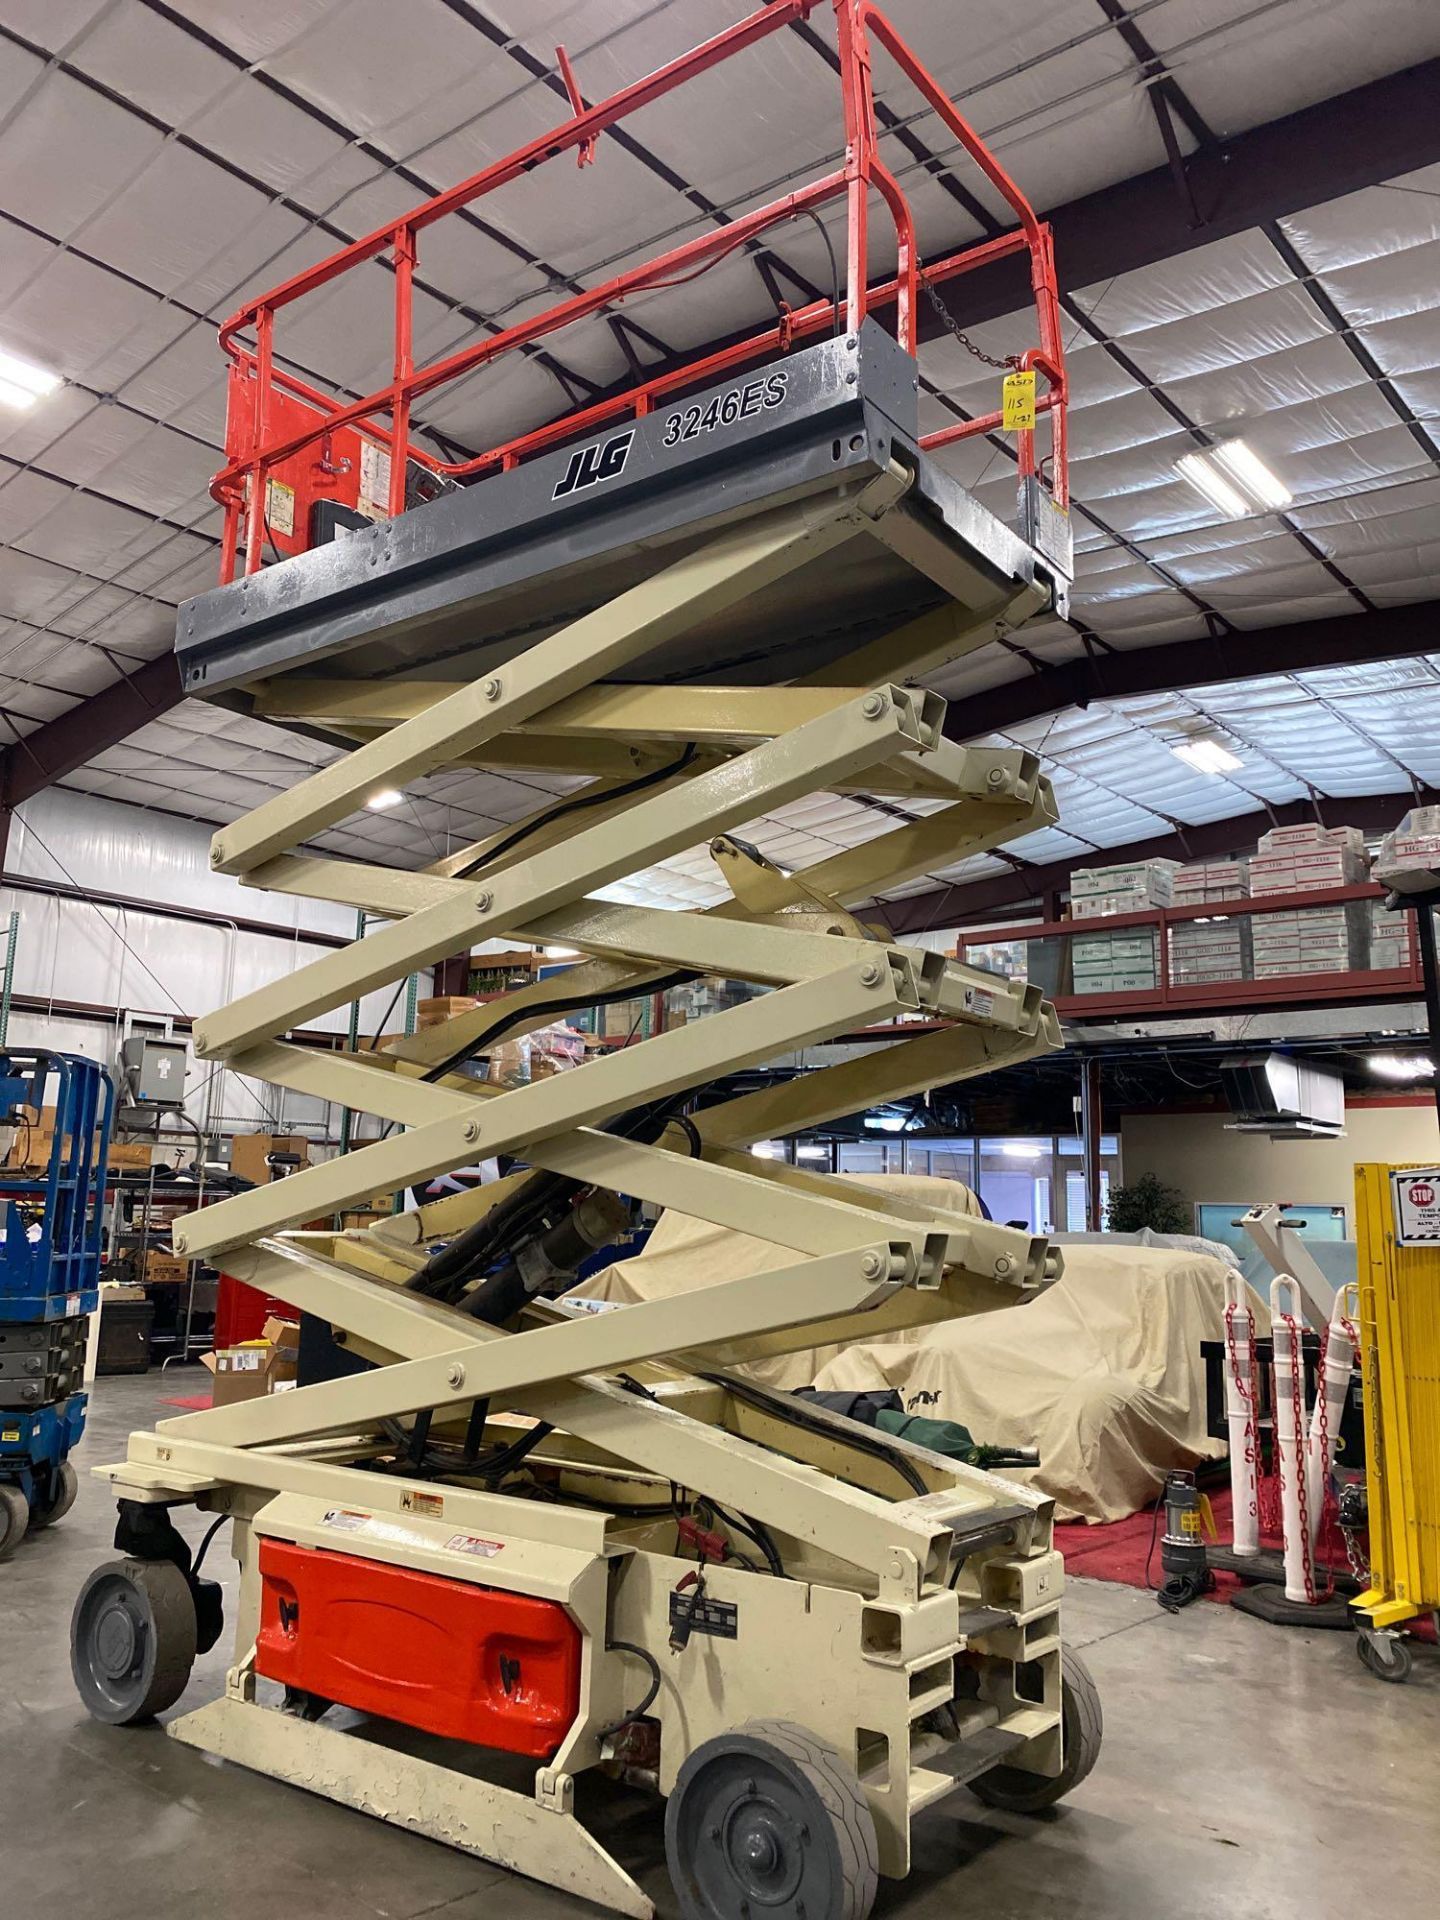 JLG 3246ES SCISSOR LIFT, BUILT IN CHARGER, RUNS AND OPERATES - Image 6 of 9